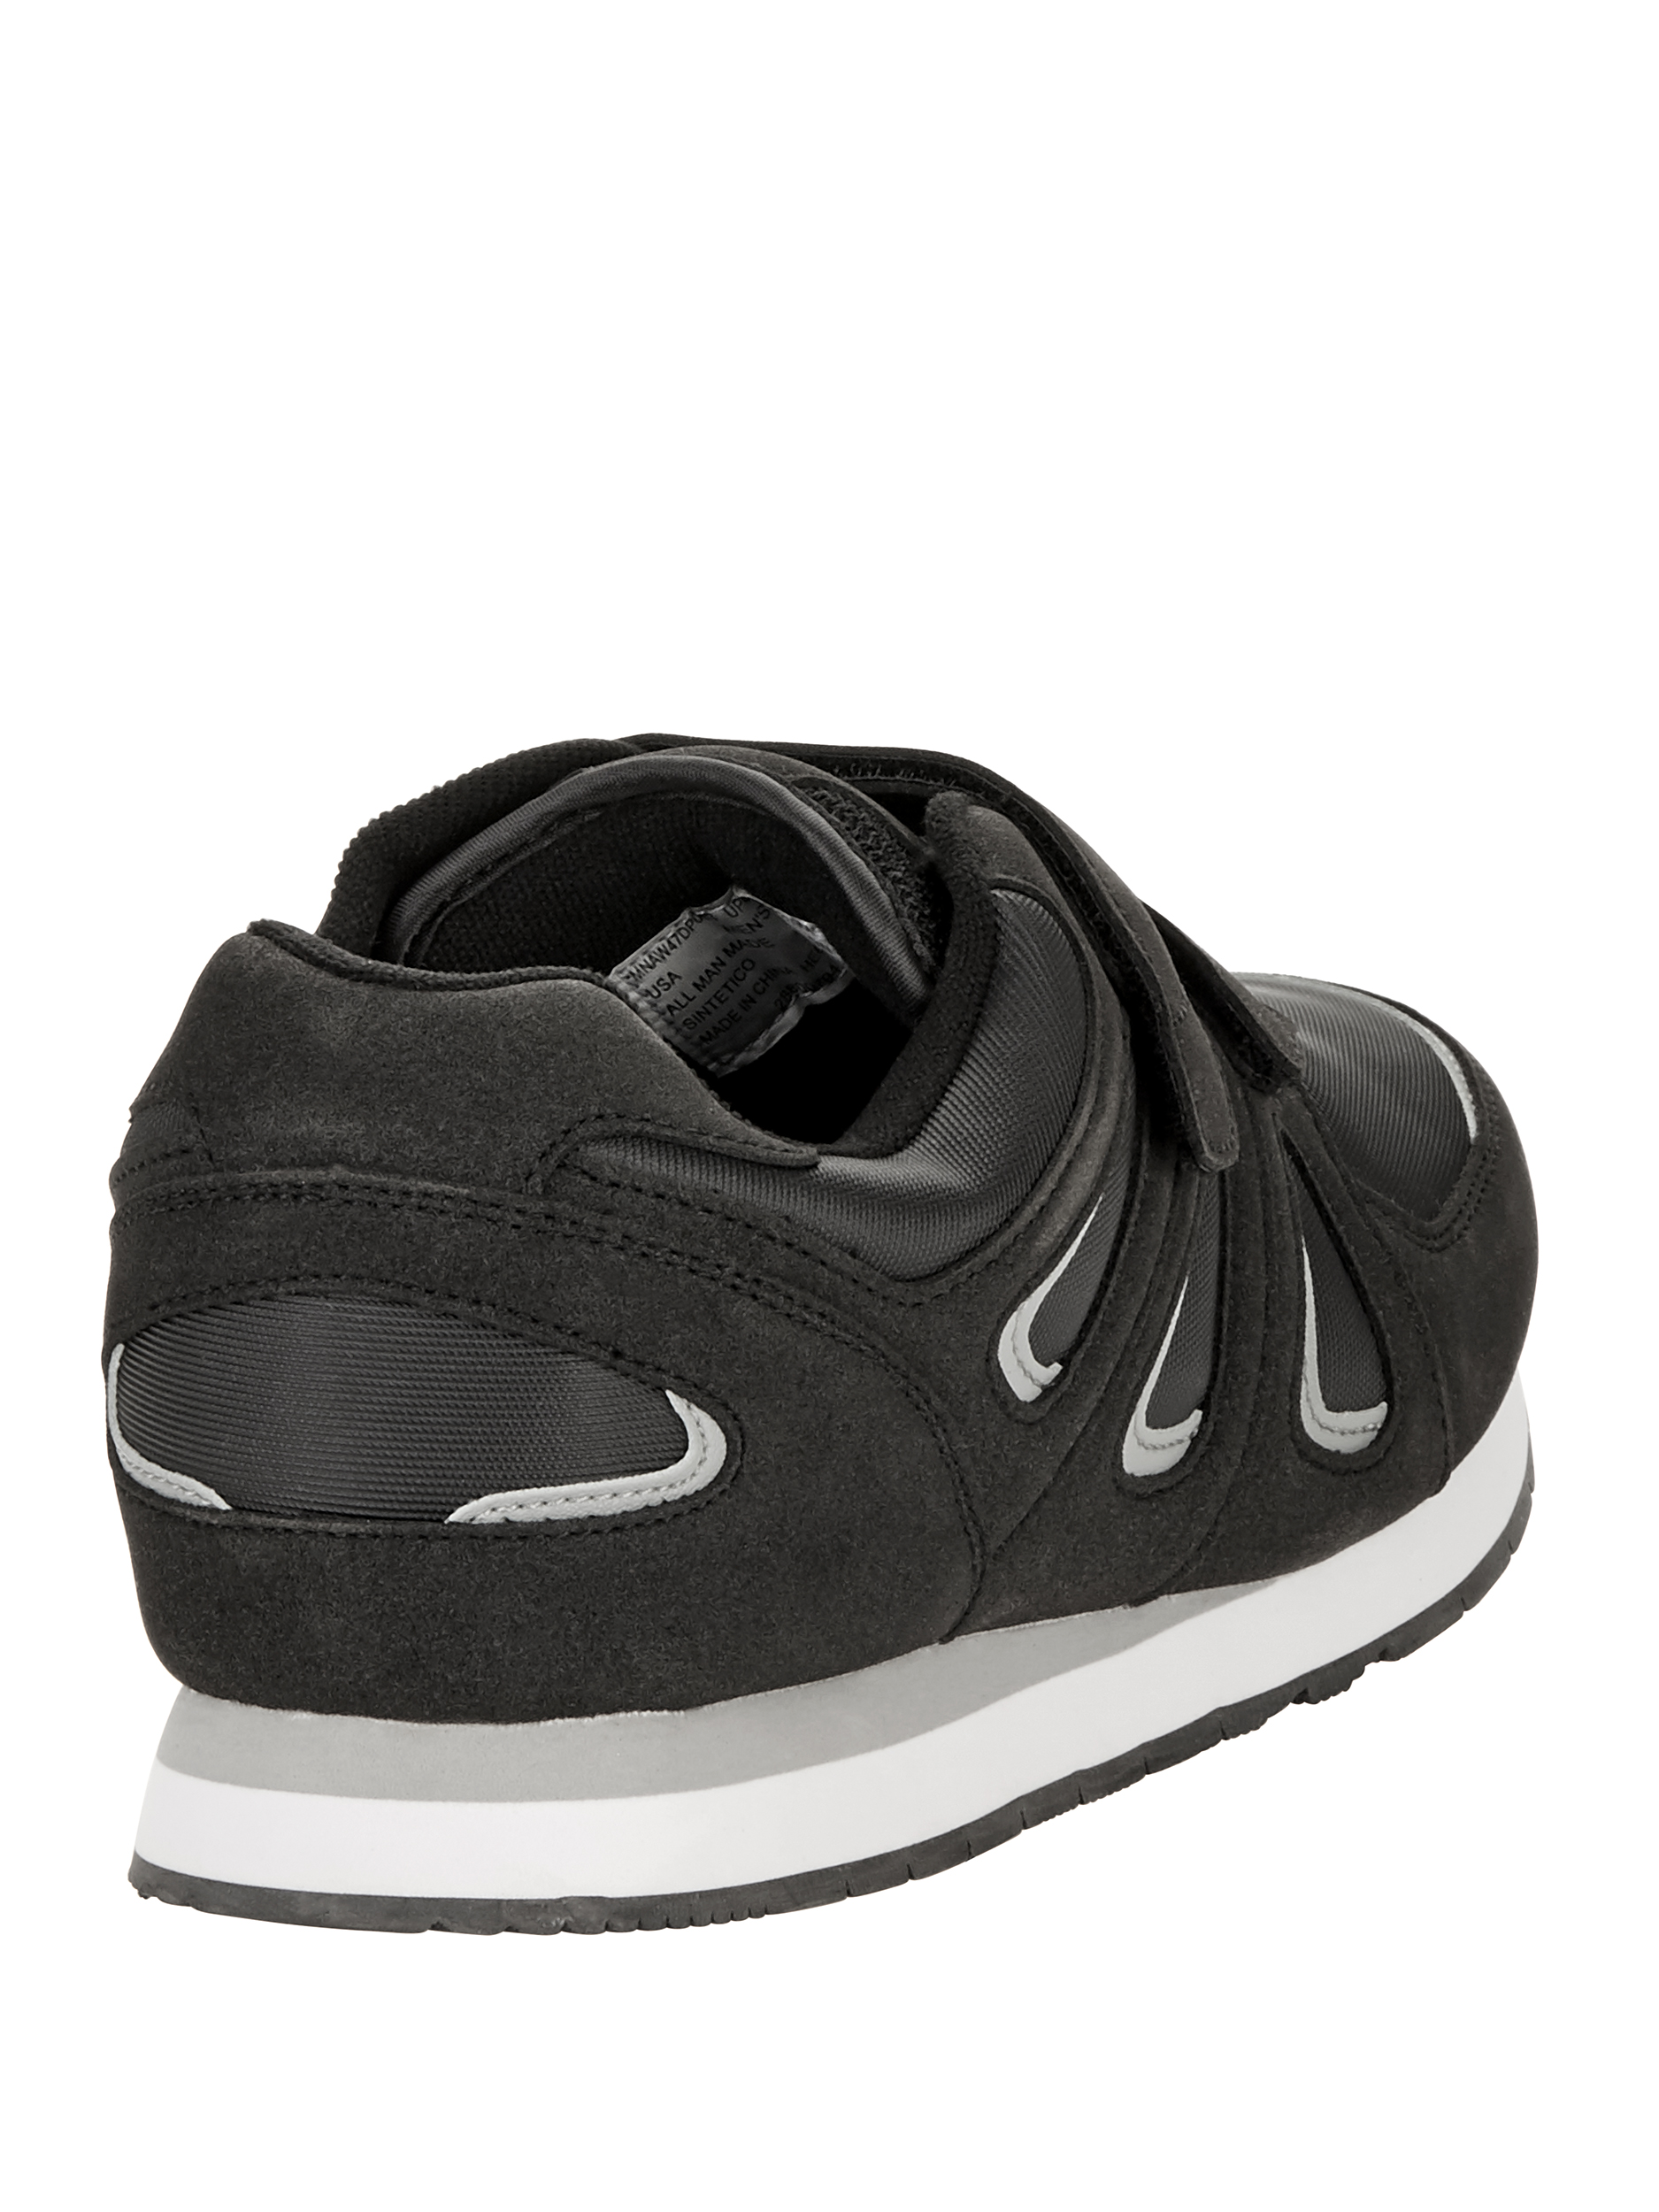 Athletic Works Men's Silver Series Athletic Shoe - image 5 of 7